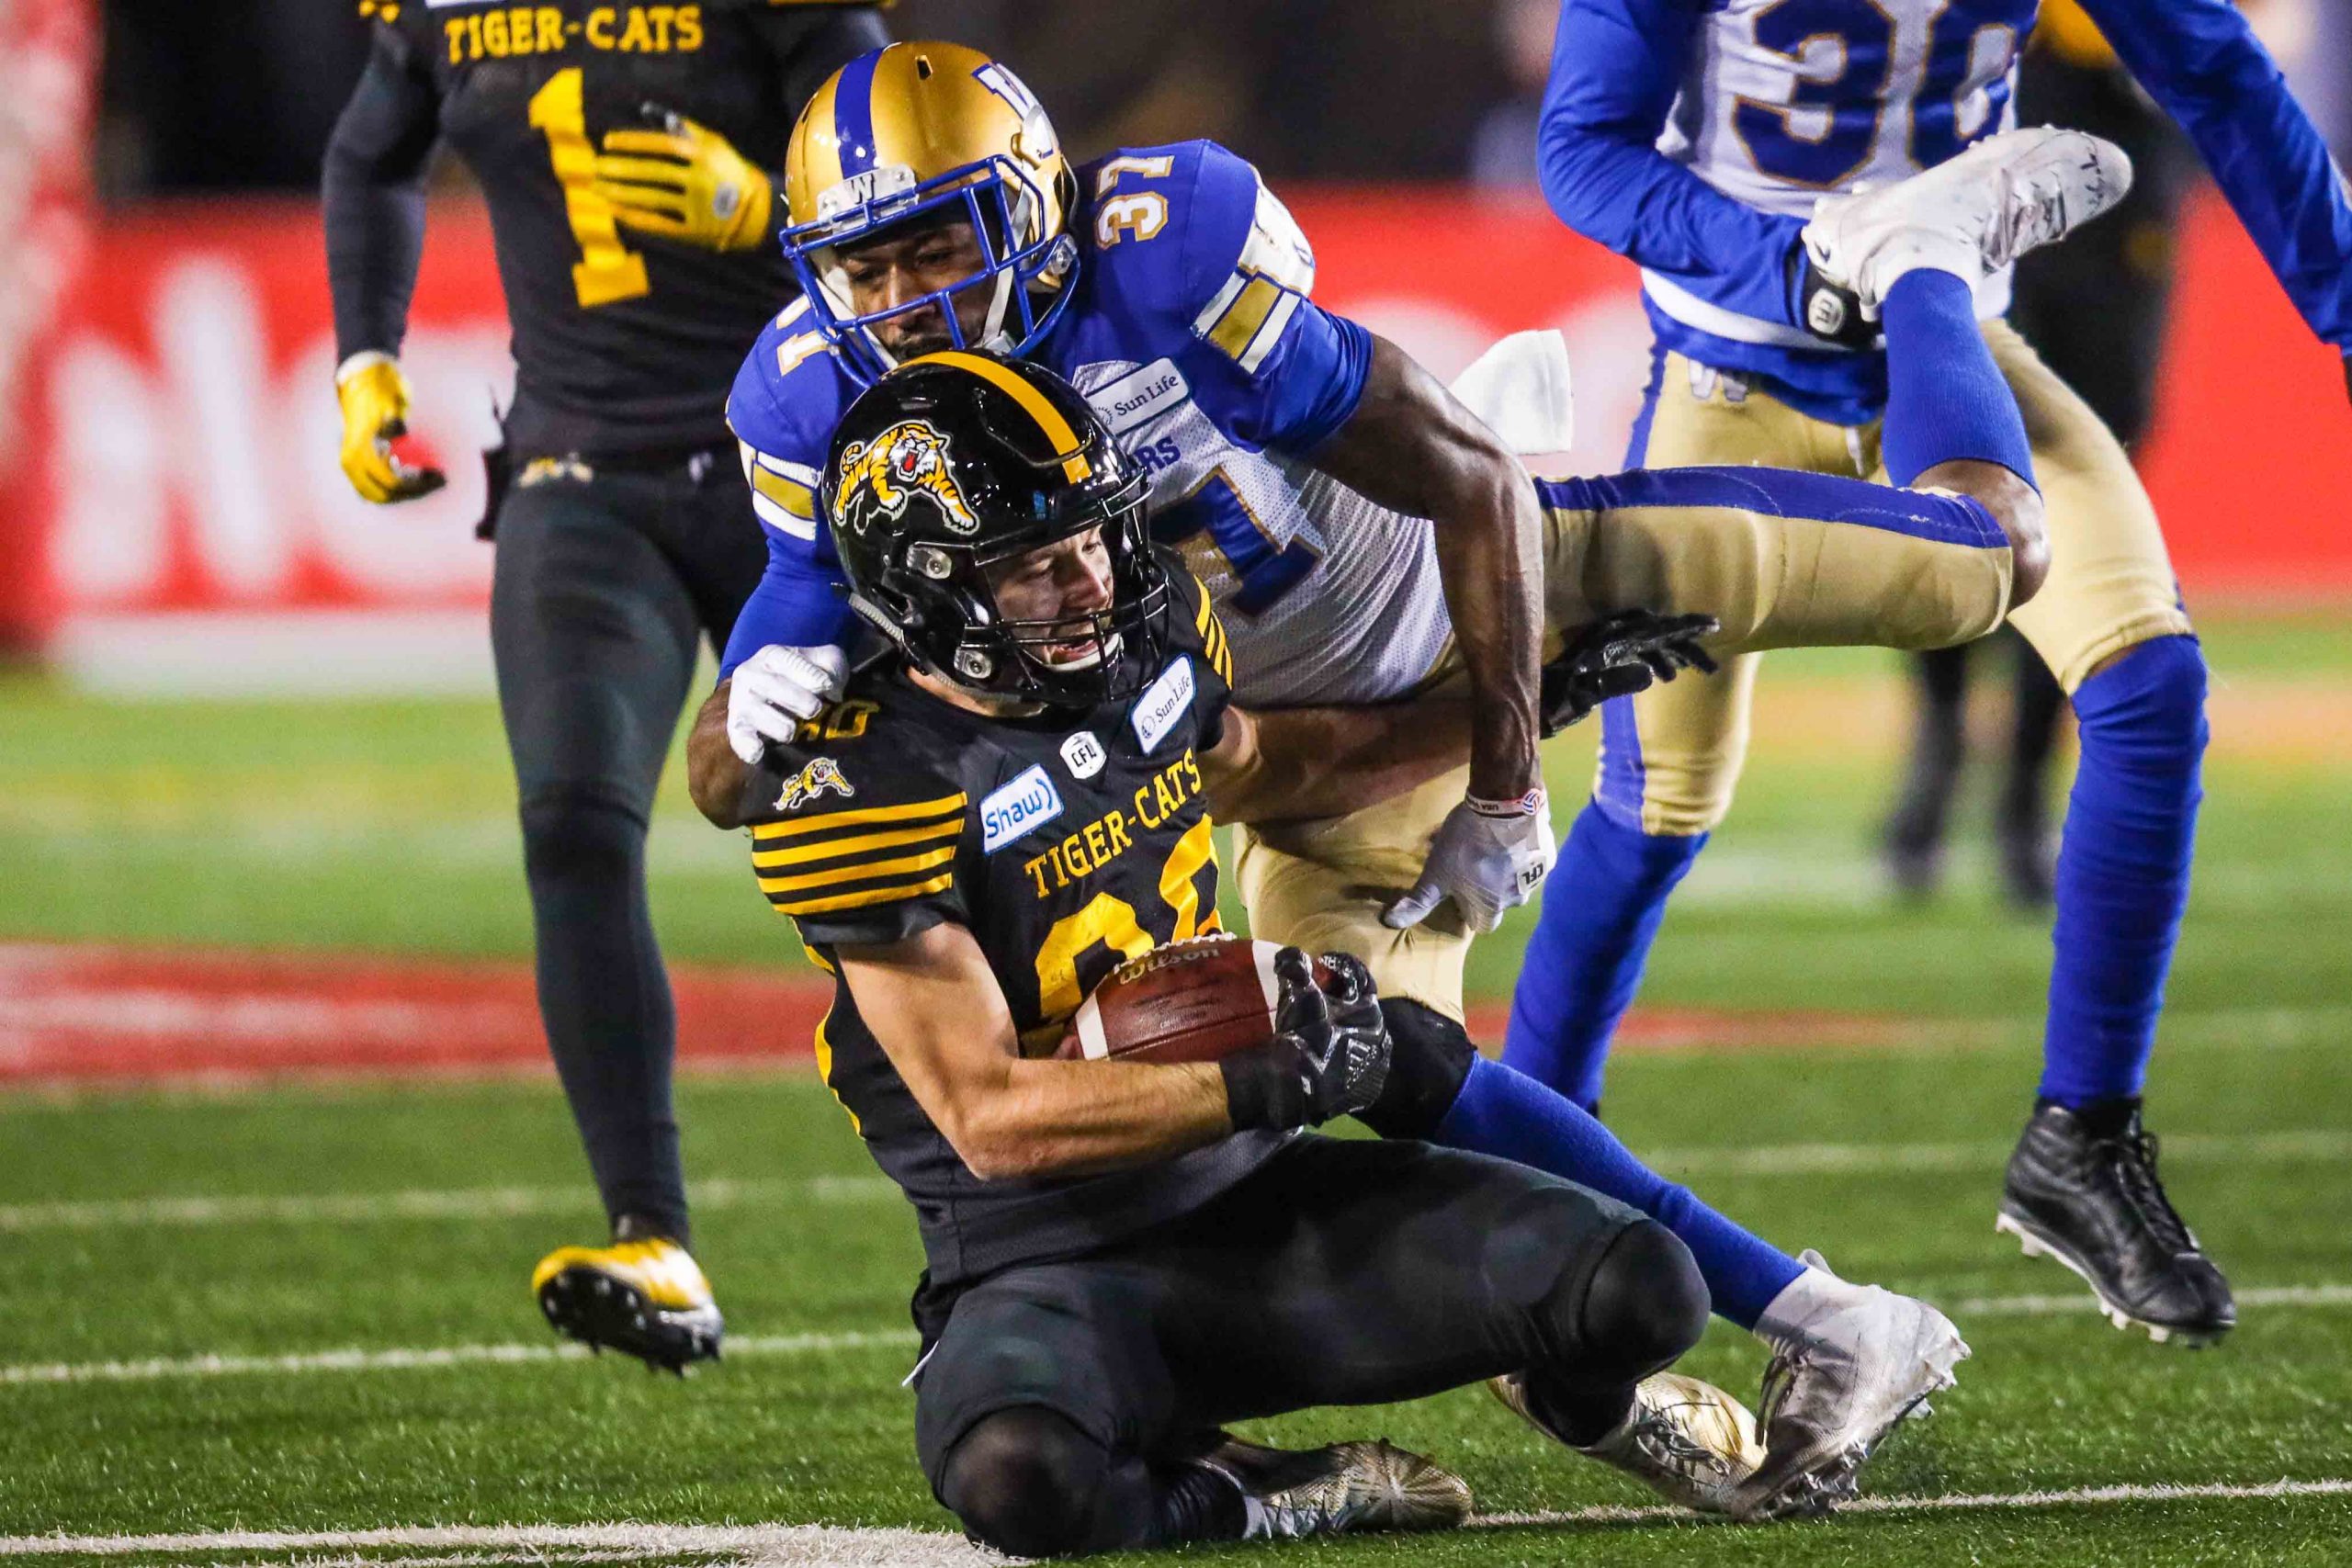 Hamilton Tiger-Cats wide receiver Jaelon Acklin (80) tackled by Winnipeg Blue Bombers defensive back Brandon Alexander (37) in the second half during the 107th Grey Cup championship football game.